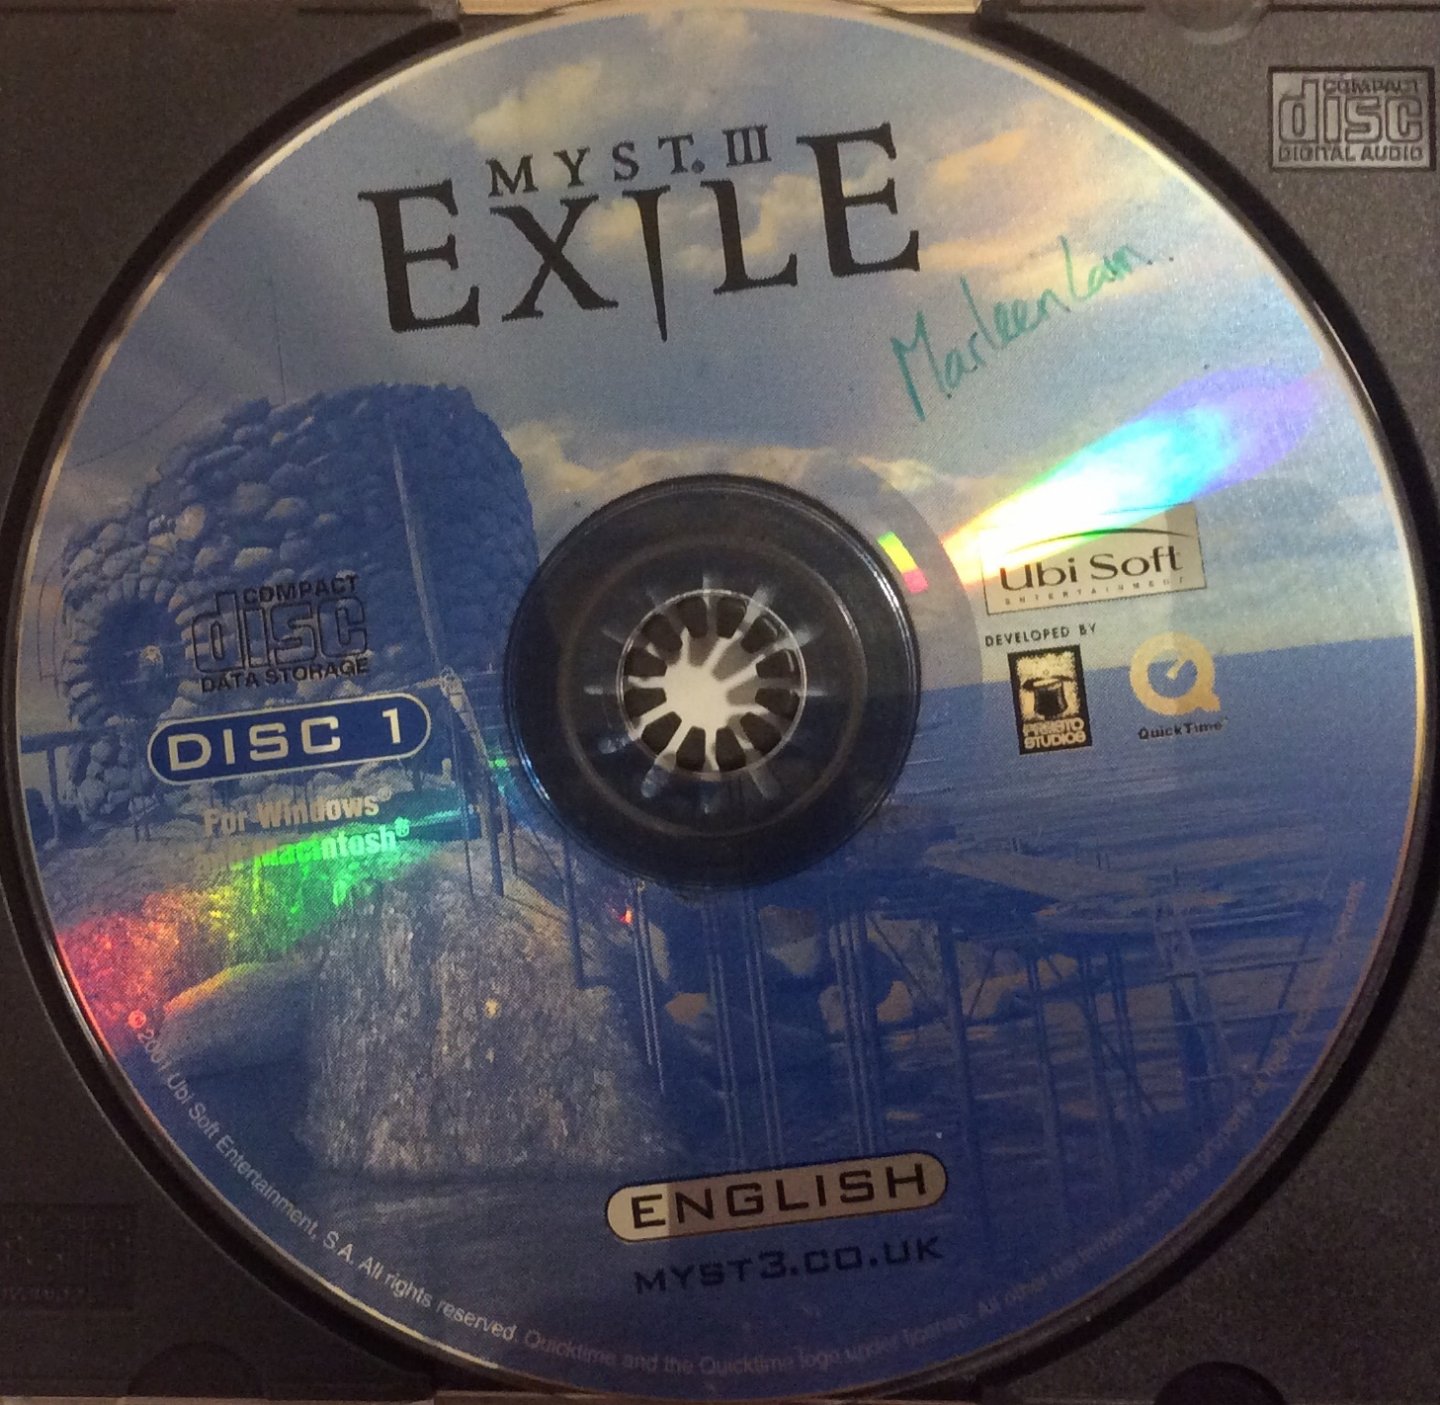 Ubi Soft - Myst III Exile - The new sequel to Myst and Riven